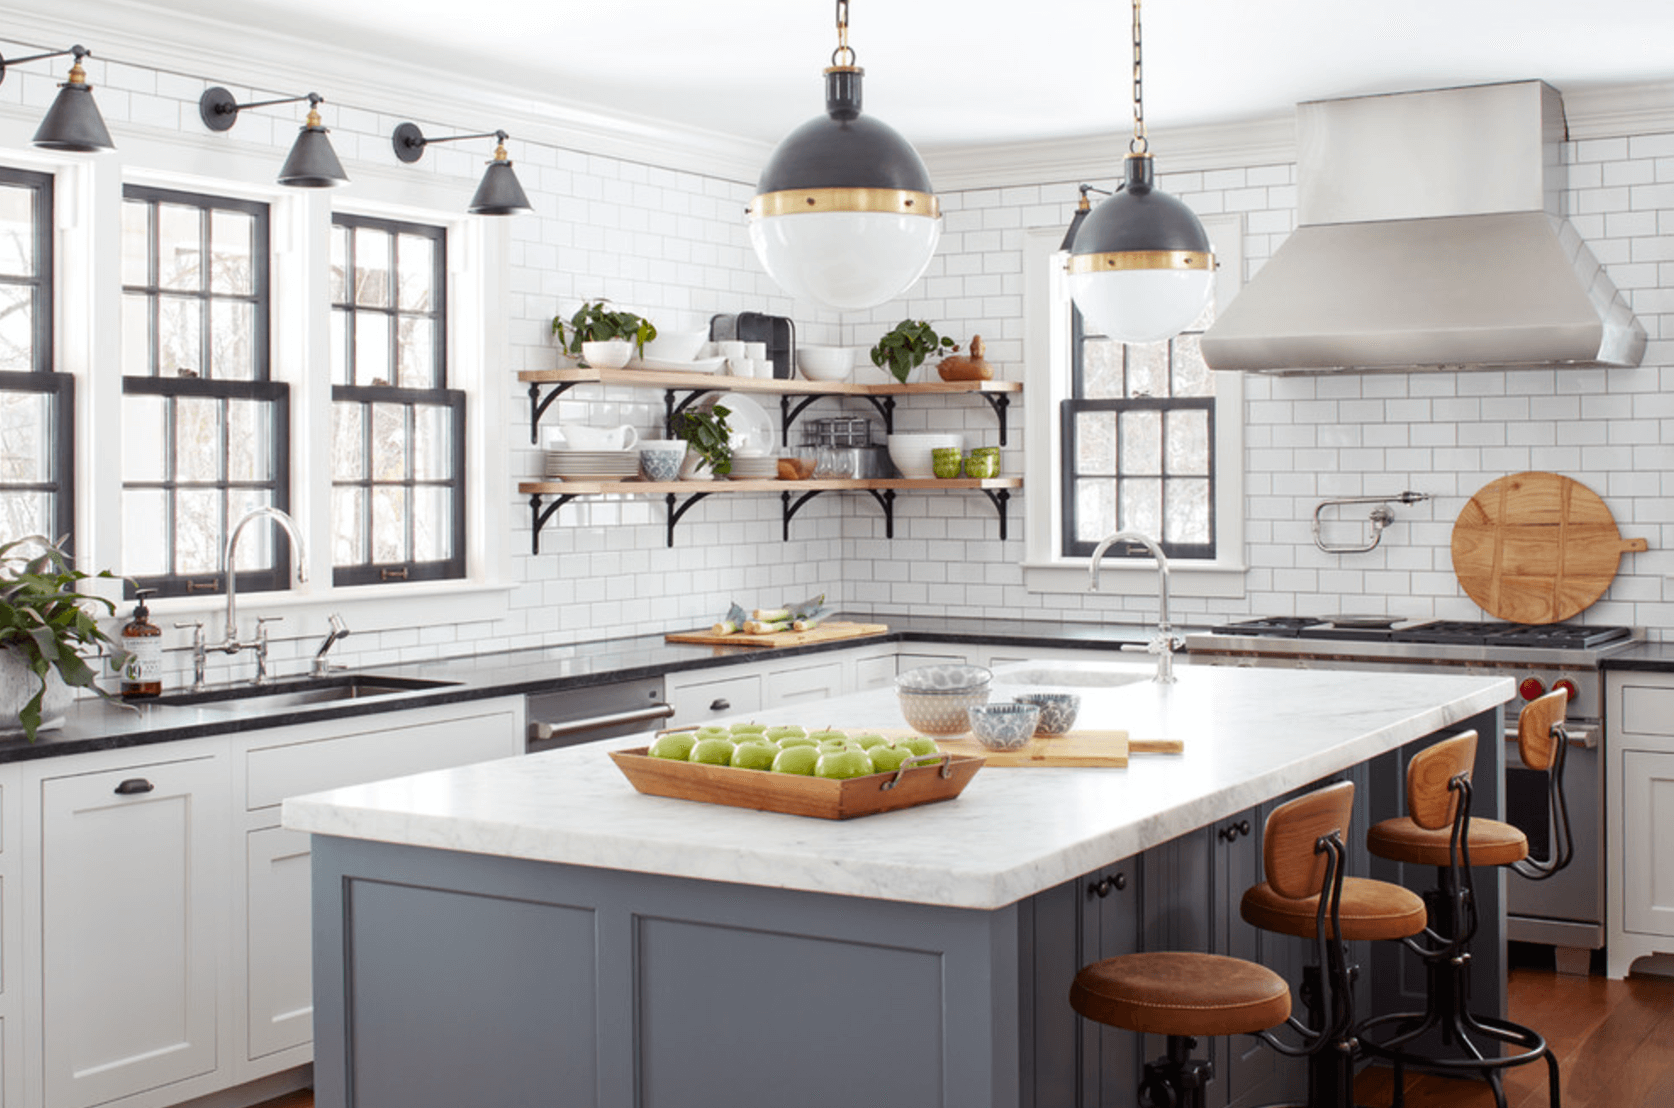 5 Ways To Update Your Kitchen When You Cannot Renovate